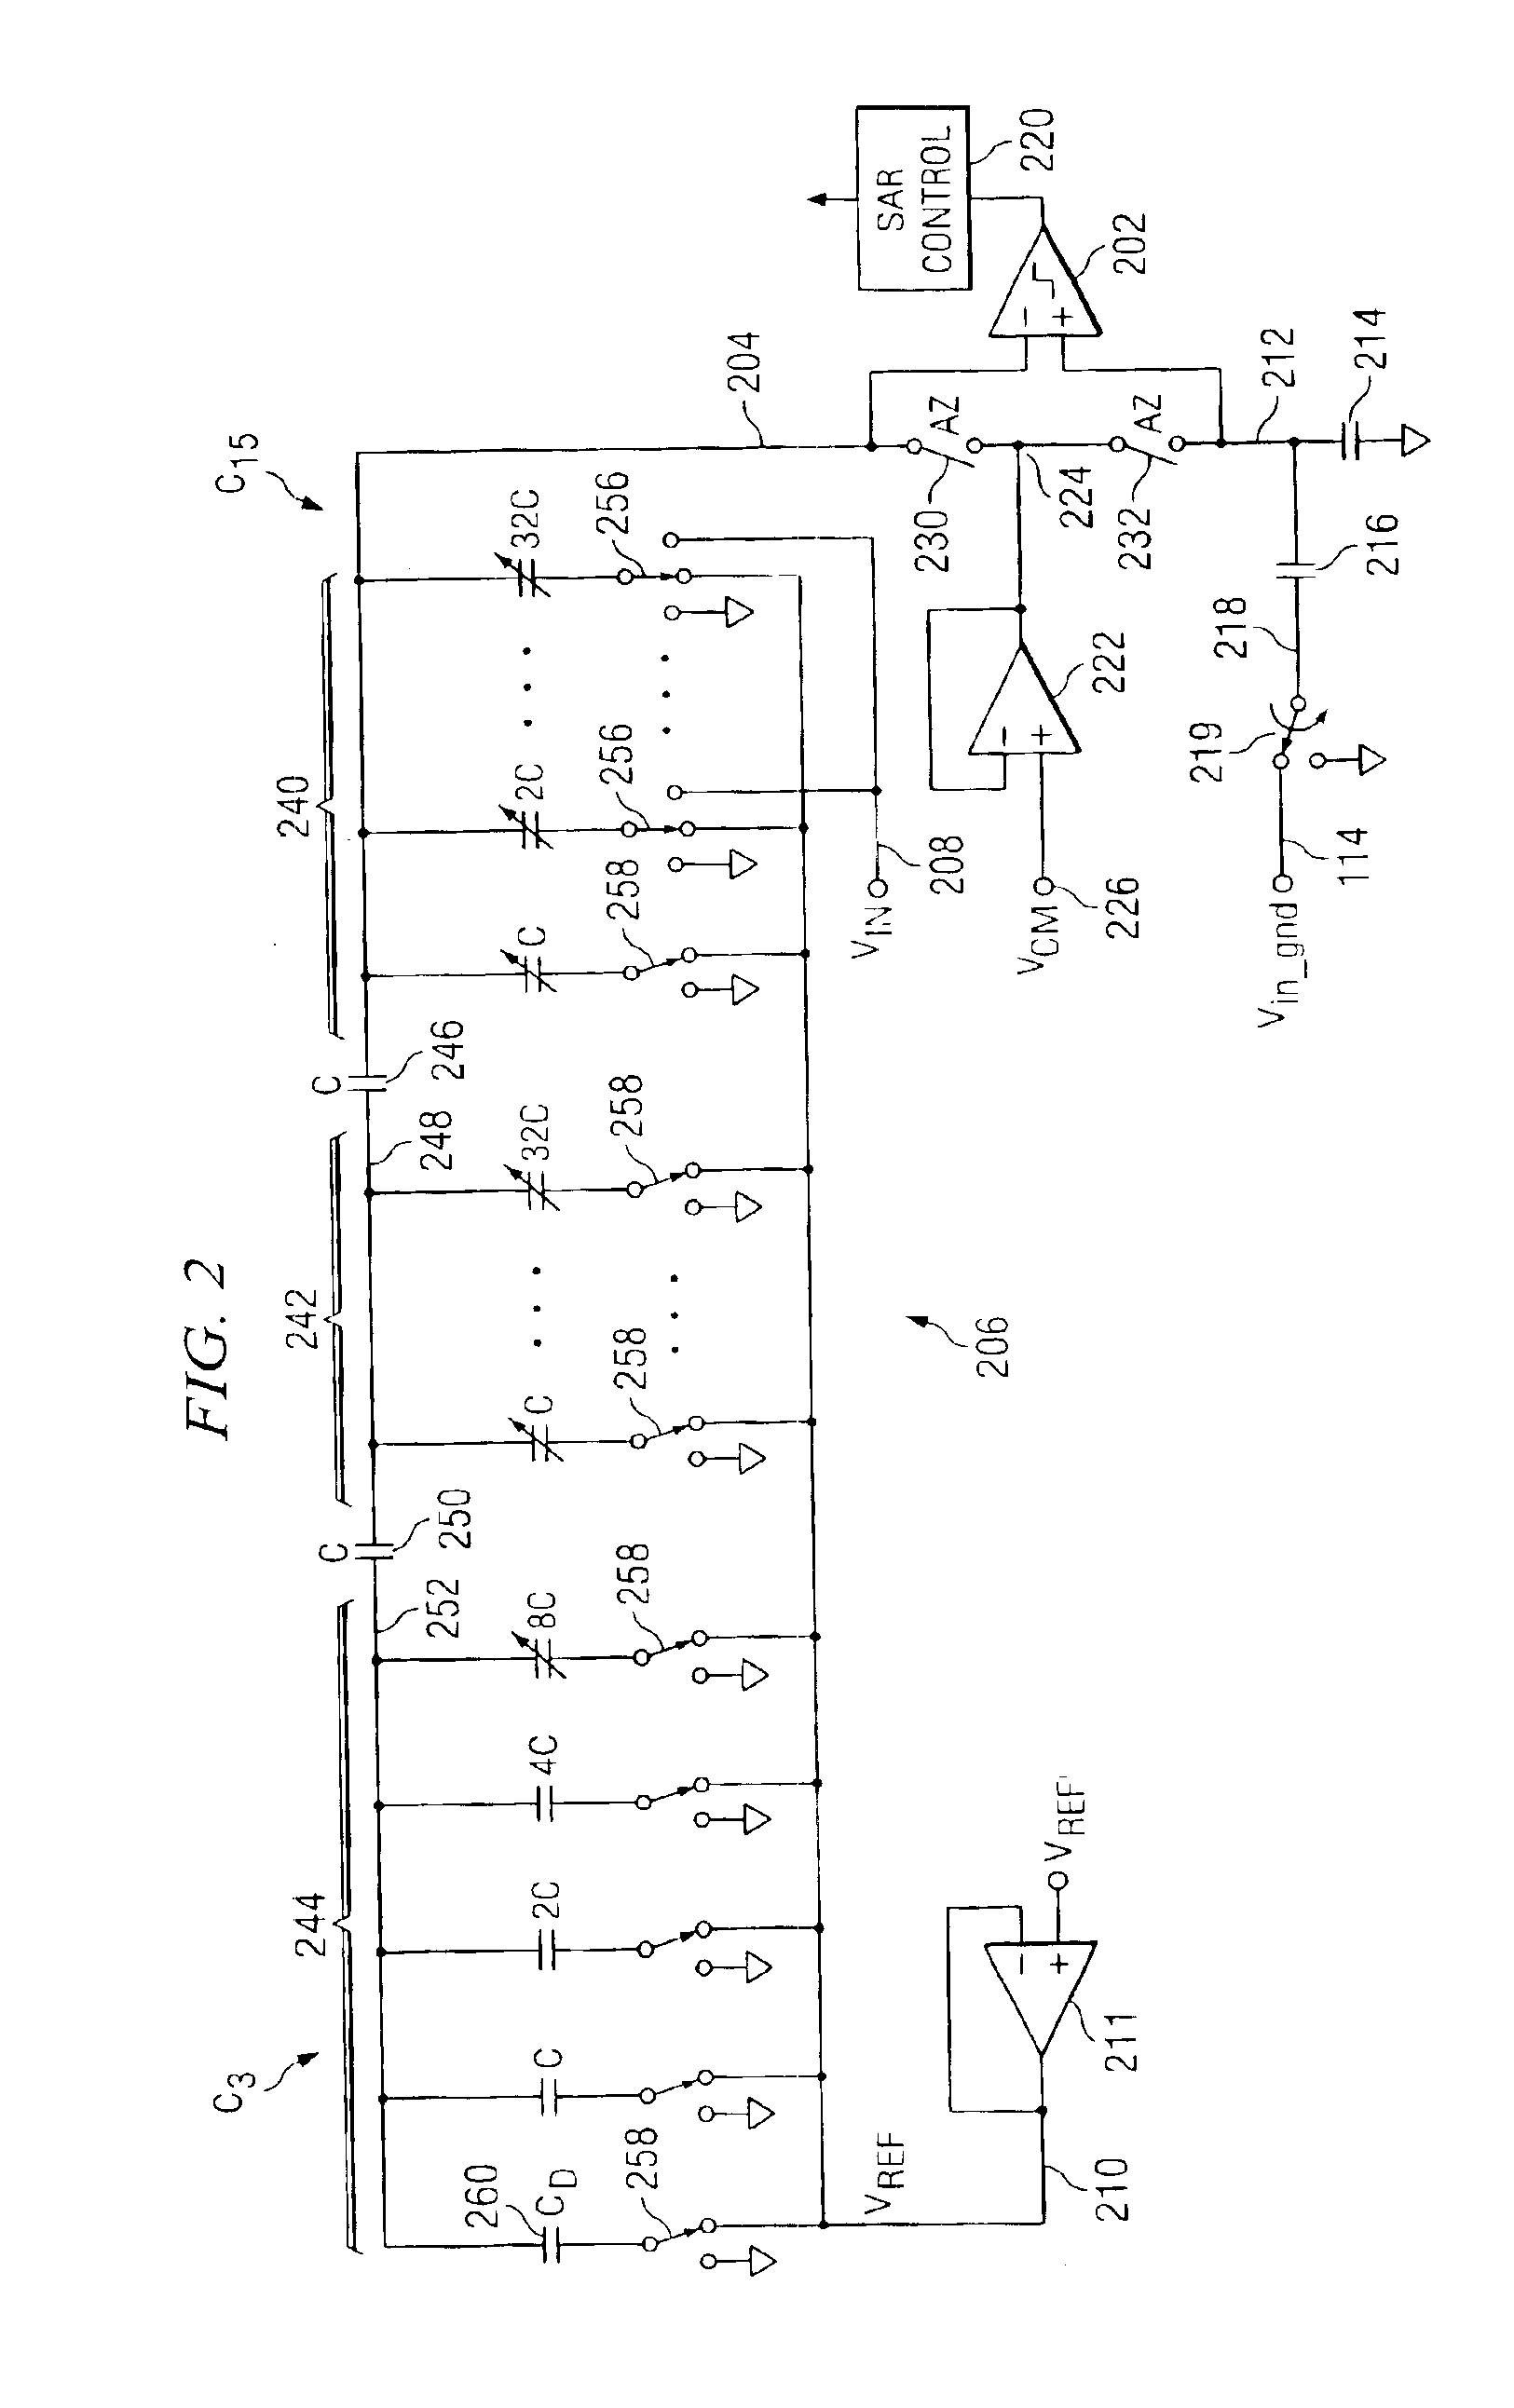 SAR analog-to-digital converter with two single ended inputs